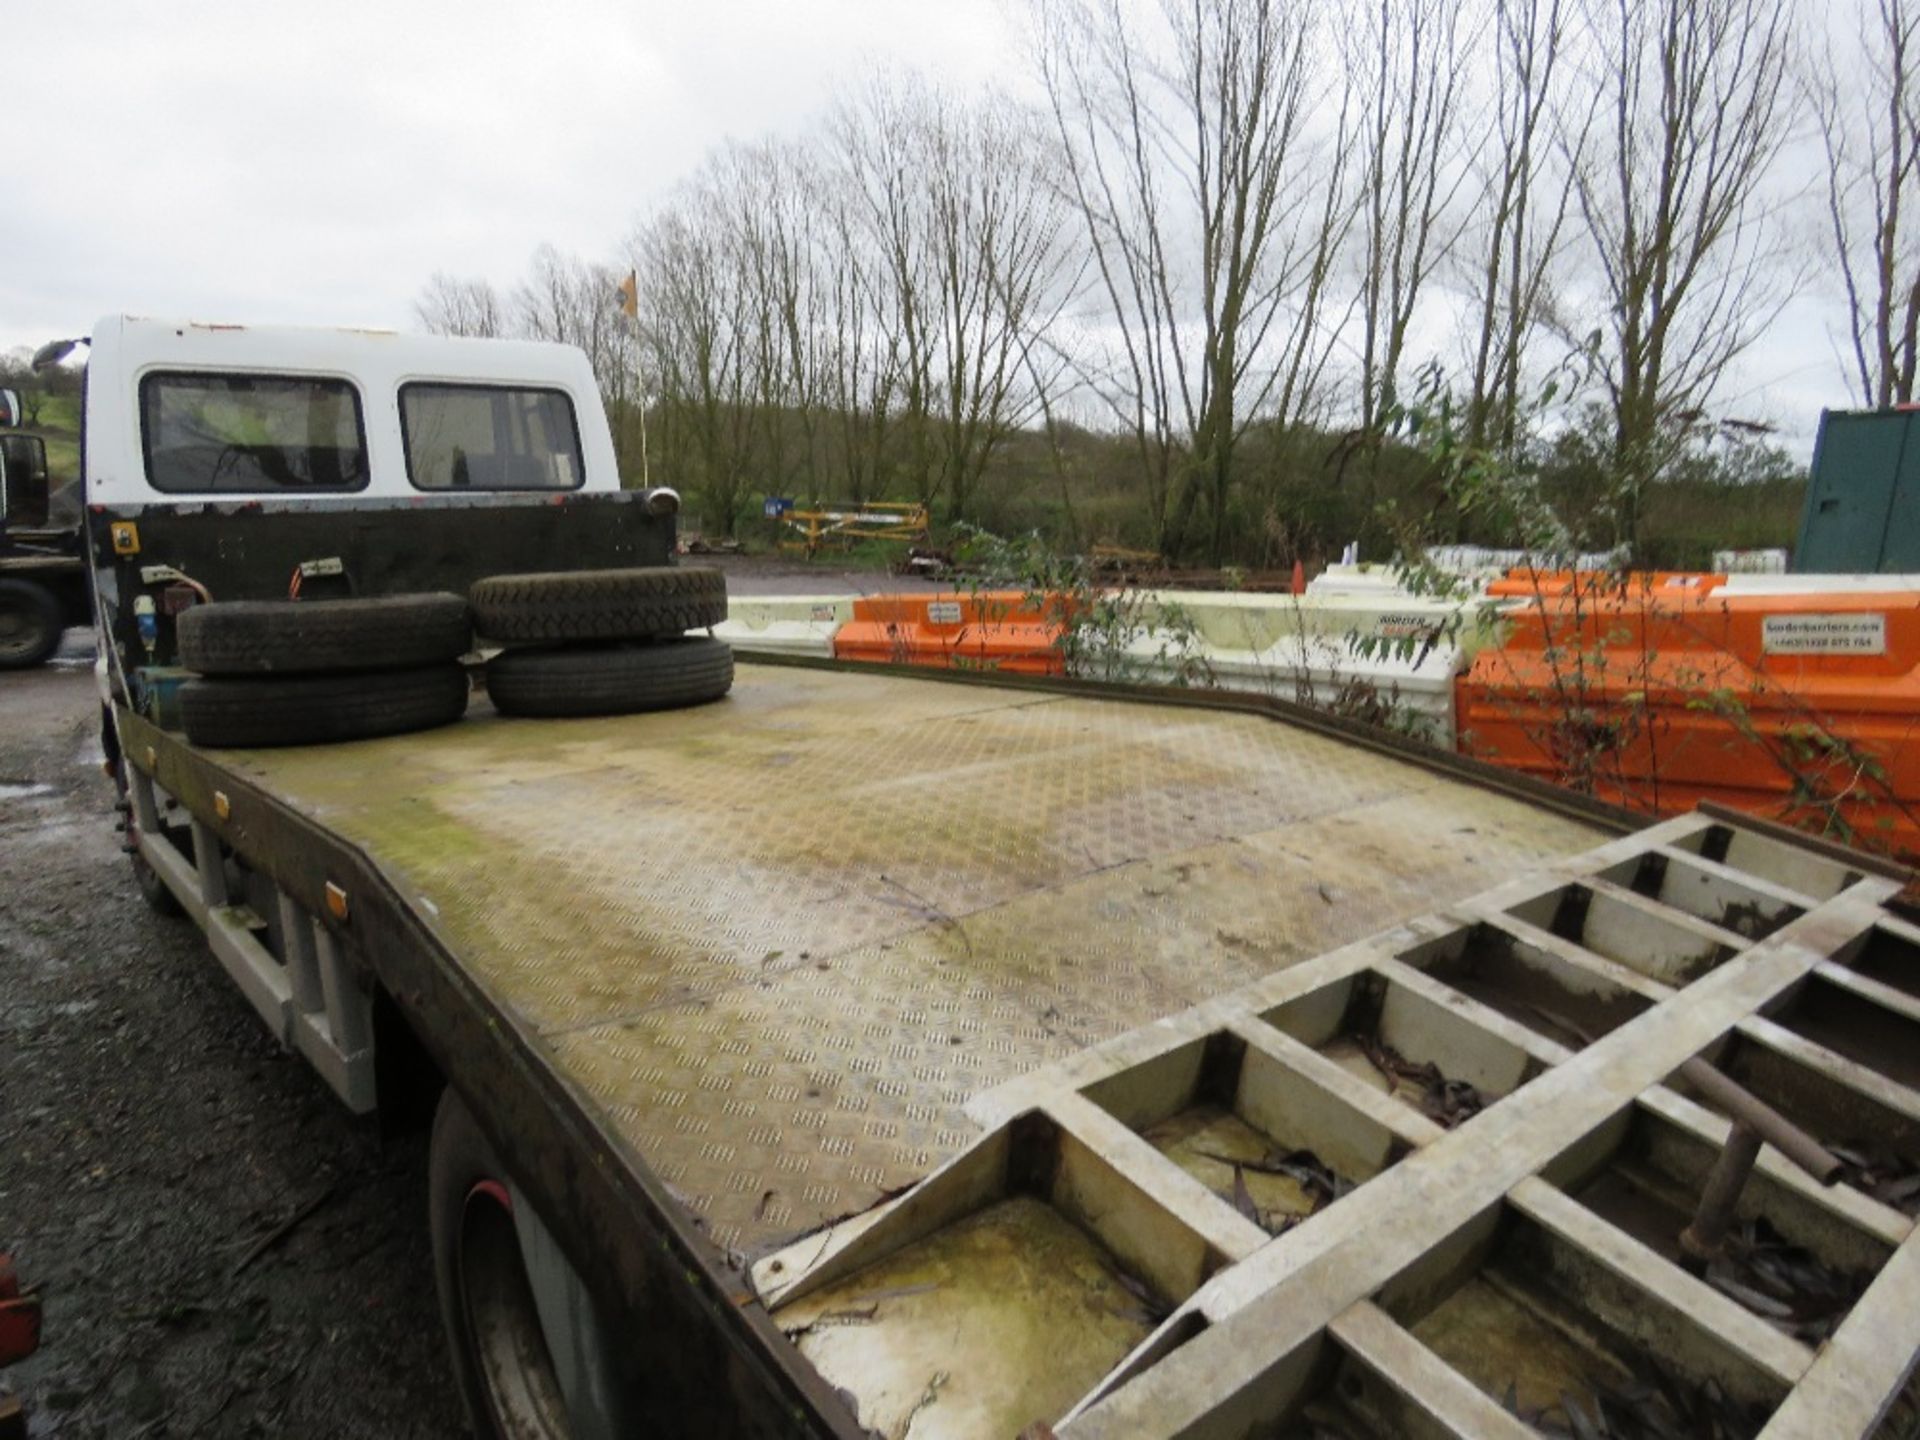 CARGO BEAVERTAIL PLANT LORRY. D713 XPE WHEN TESTED WAS SEEN TO START DRIVE AND BRAKE. REG:D713 XPE. - Image 4 of 6